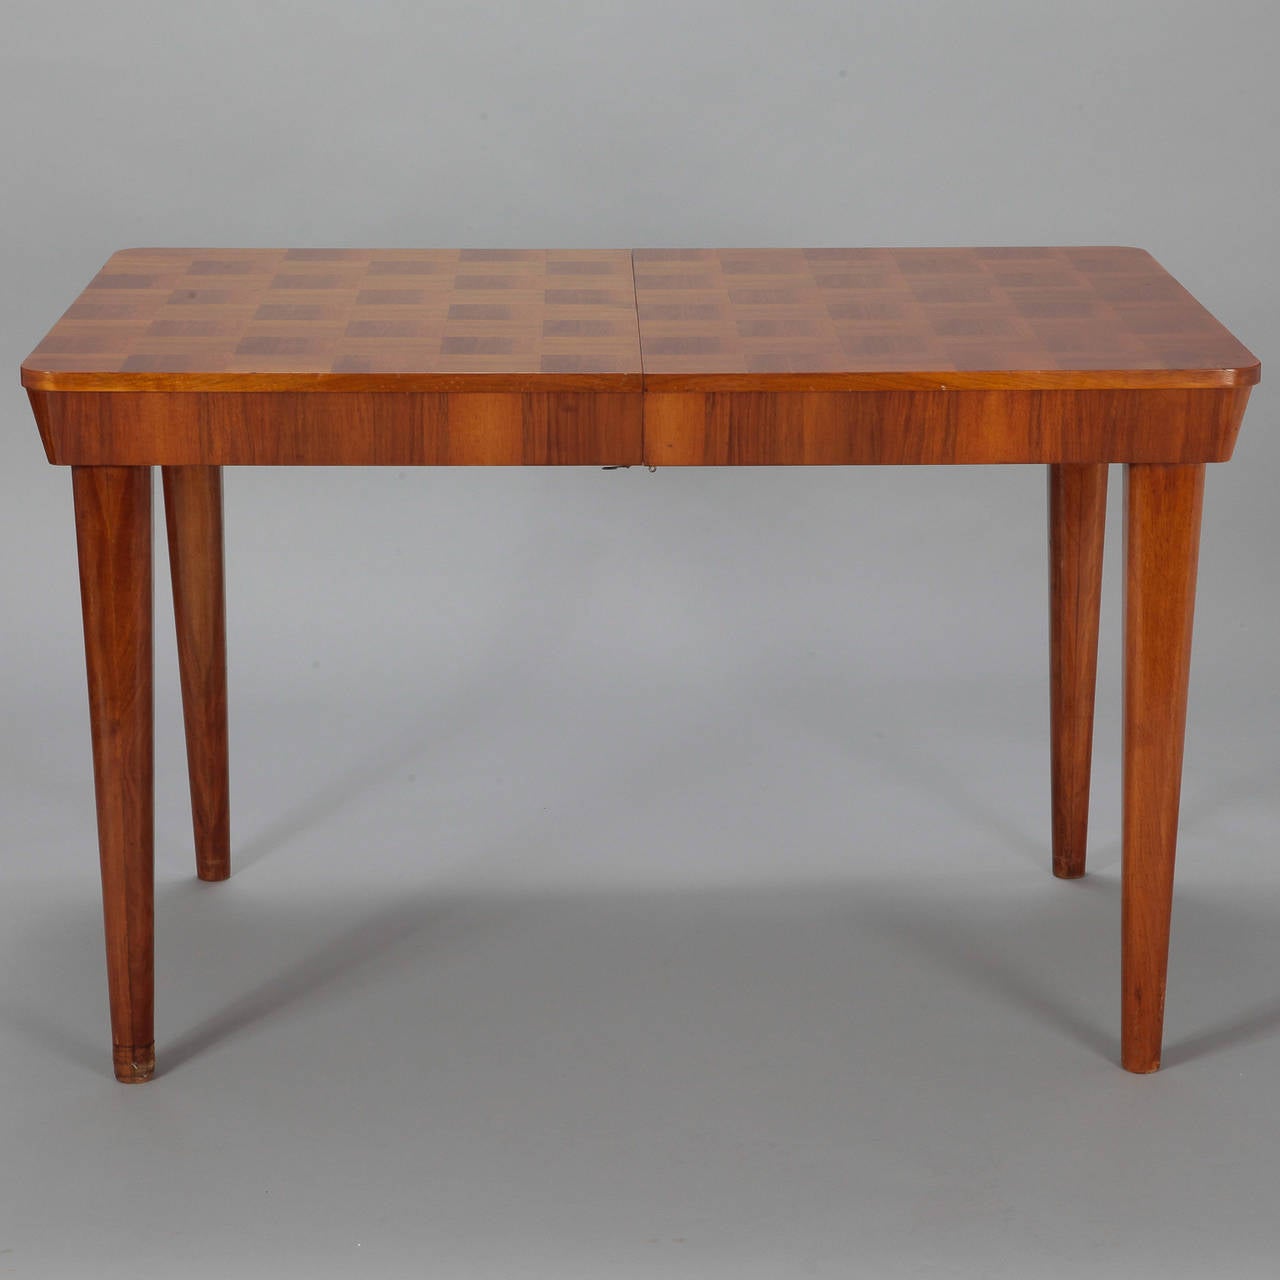 Mid-20th Century Jindrich Halabala for UP Zavody Checkerboard Table with Internal Leaf